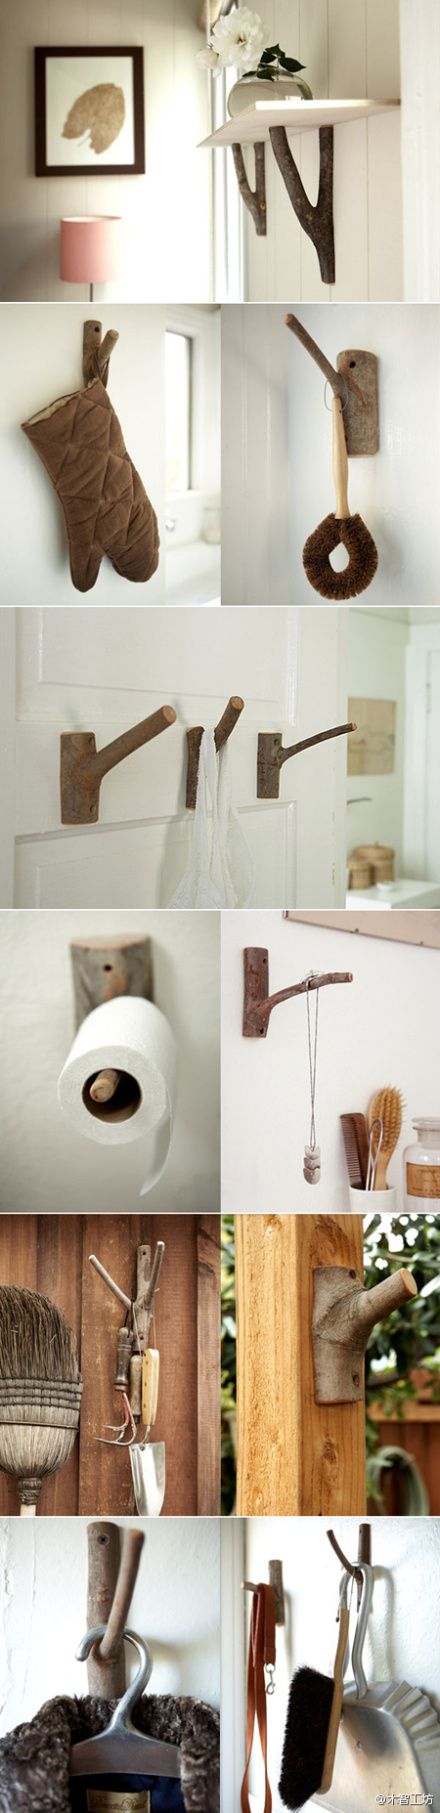 39 Simply Extraordinary DIY Branches and DIY Log Crafts That Will Mesmerize Your Guests homesthetics (34)